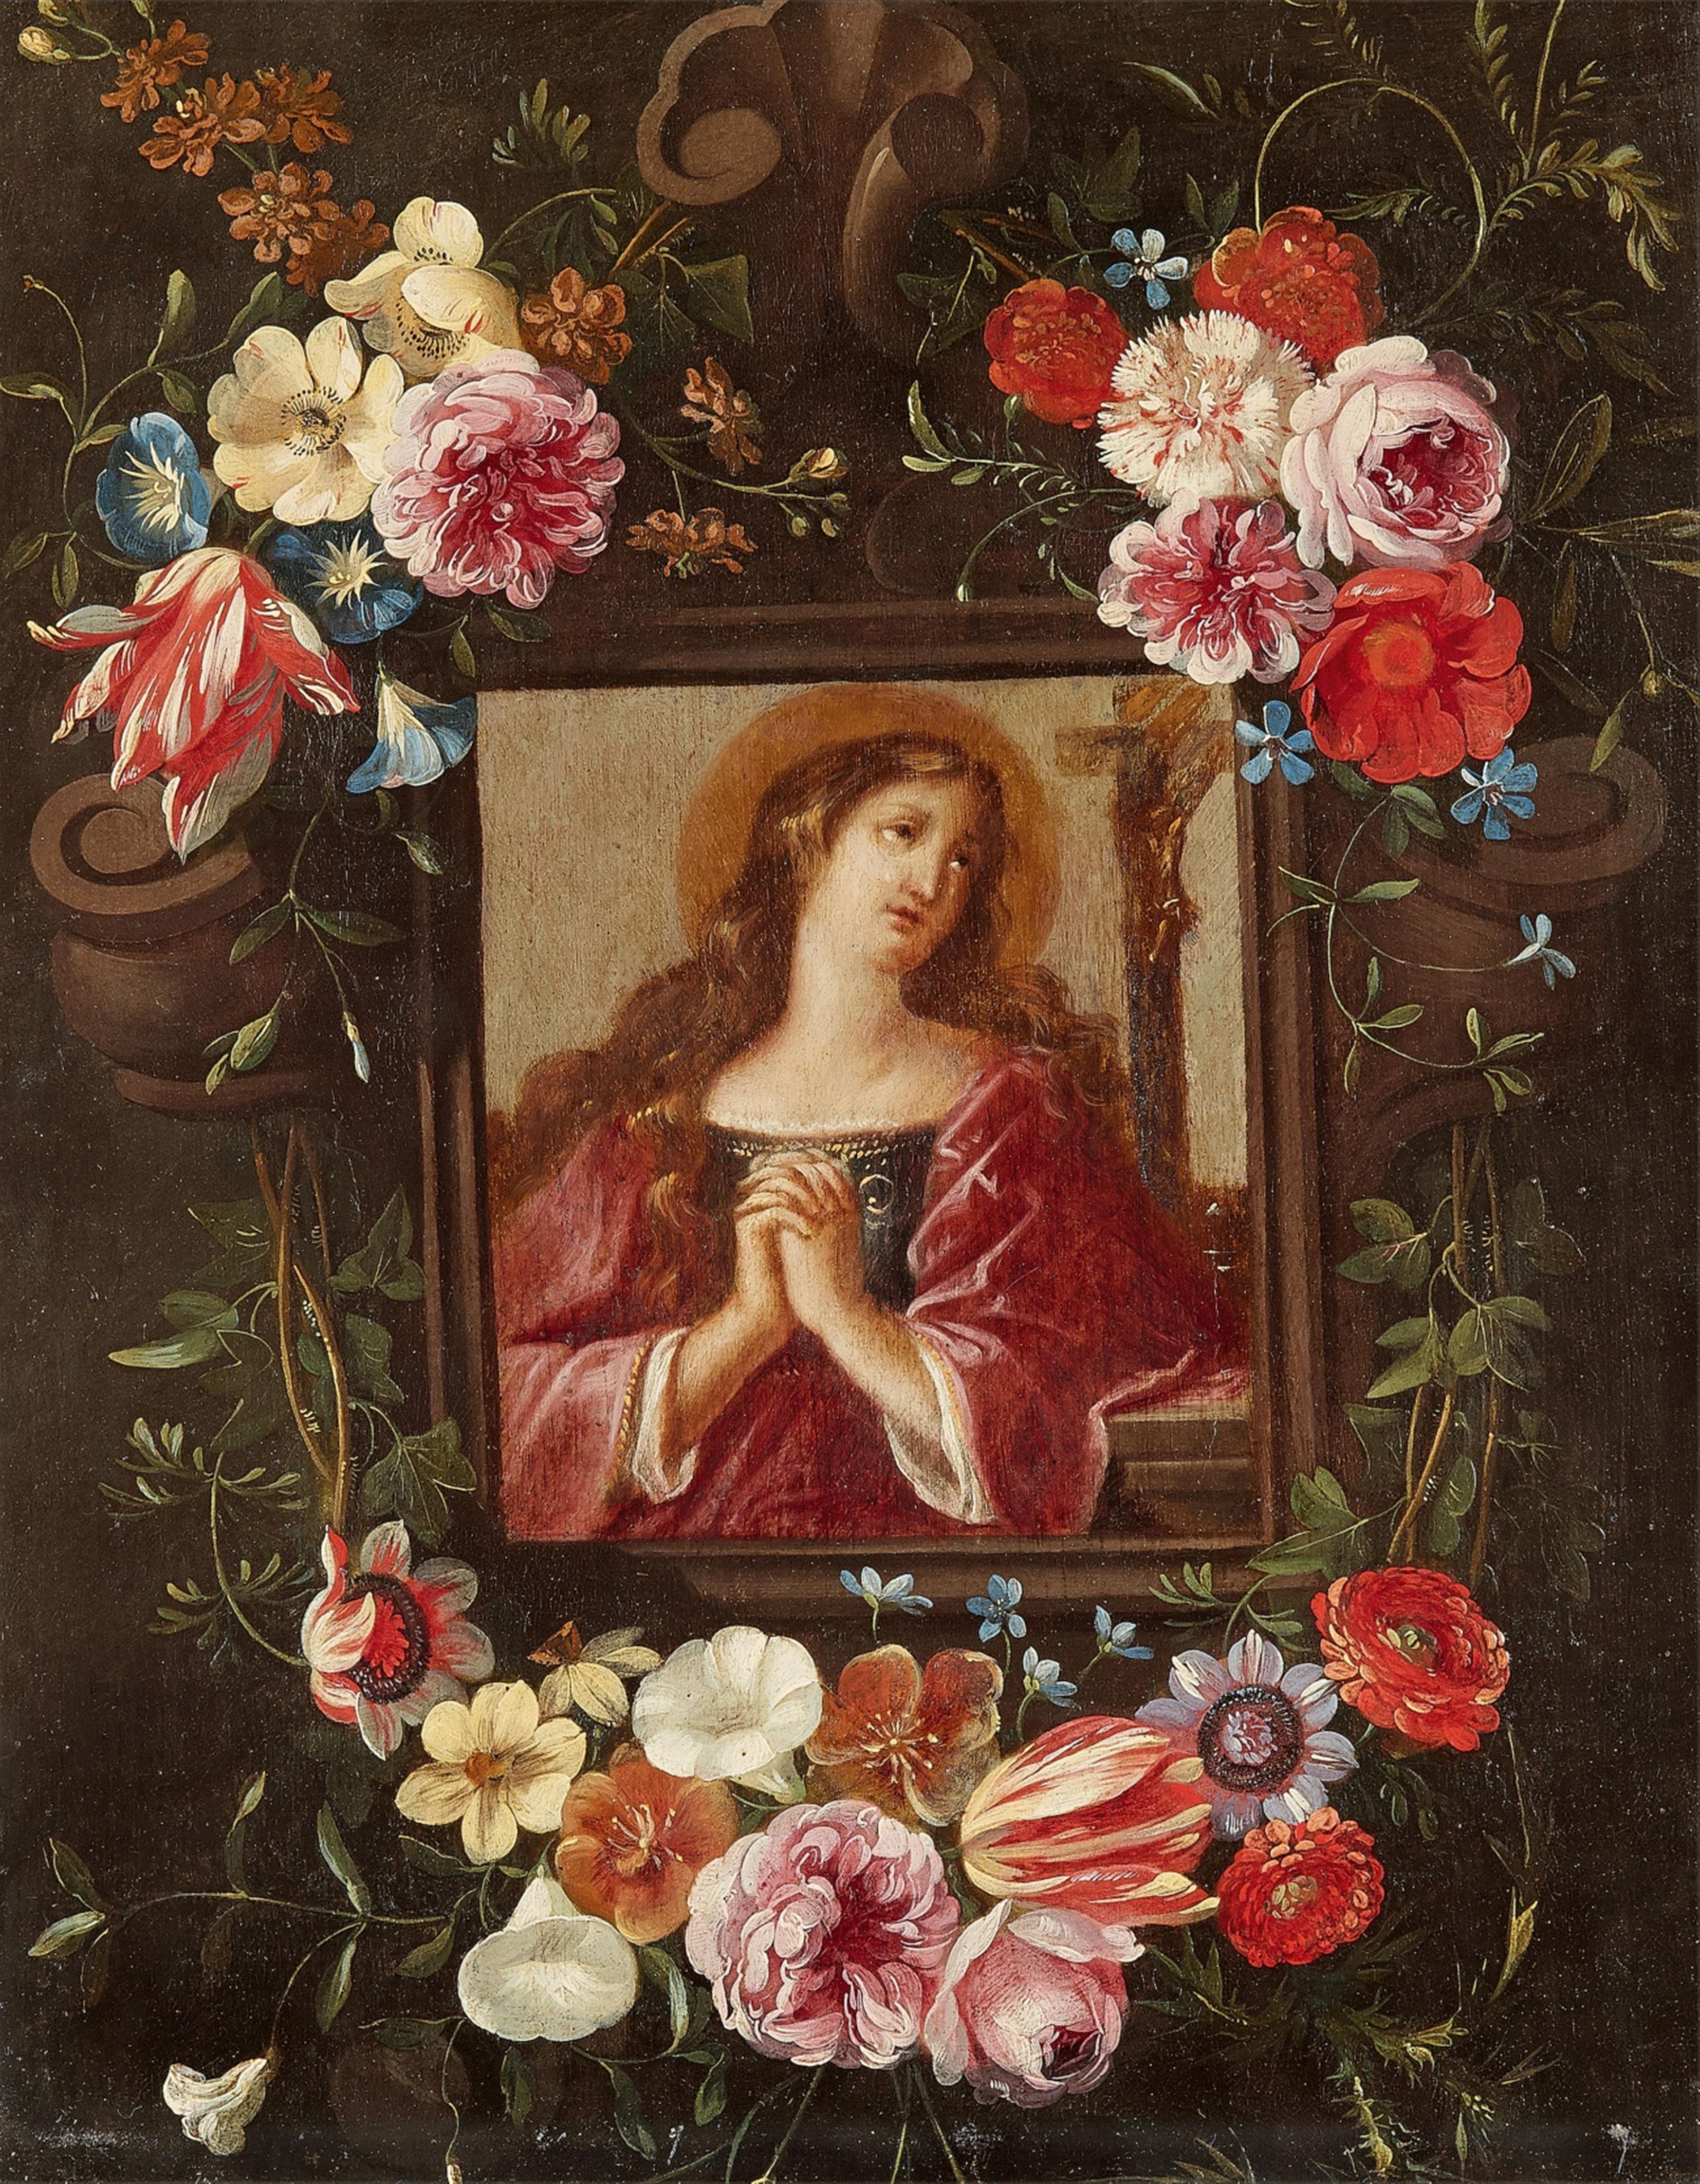 Flemish School, 2nd half 17th century - Floral Garland with the Penitent Mary Magdalene - image-1